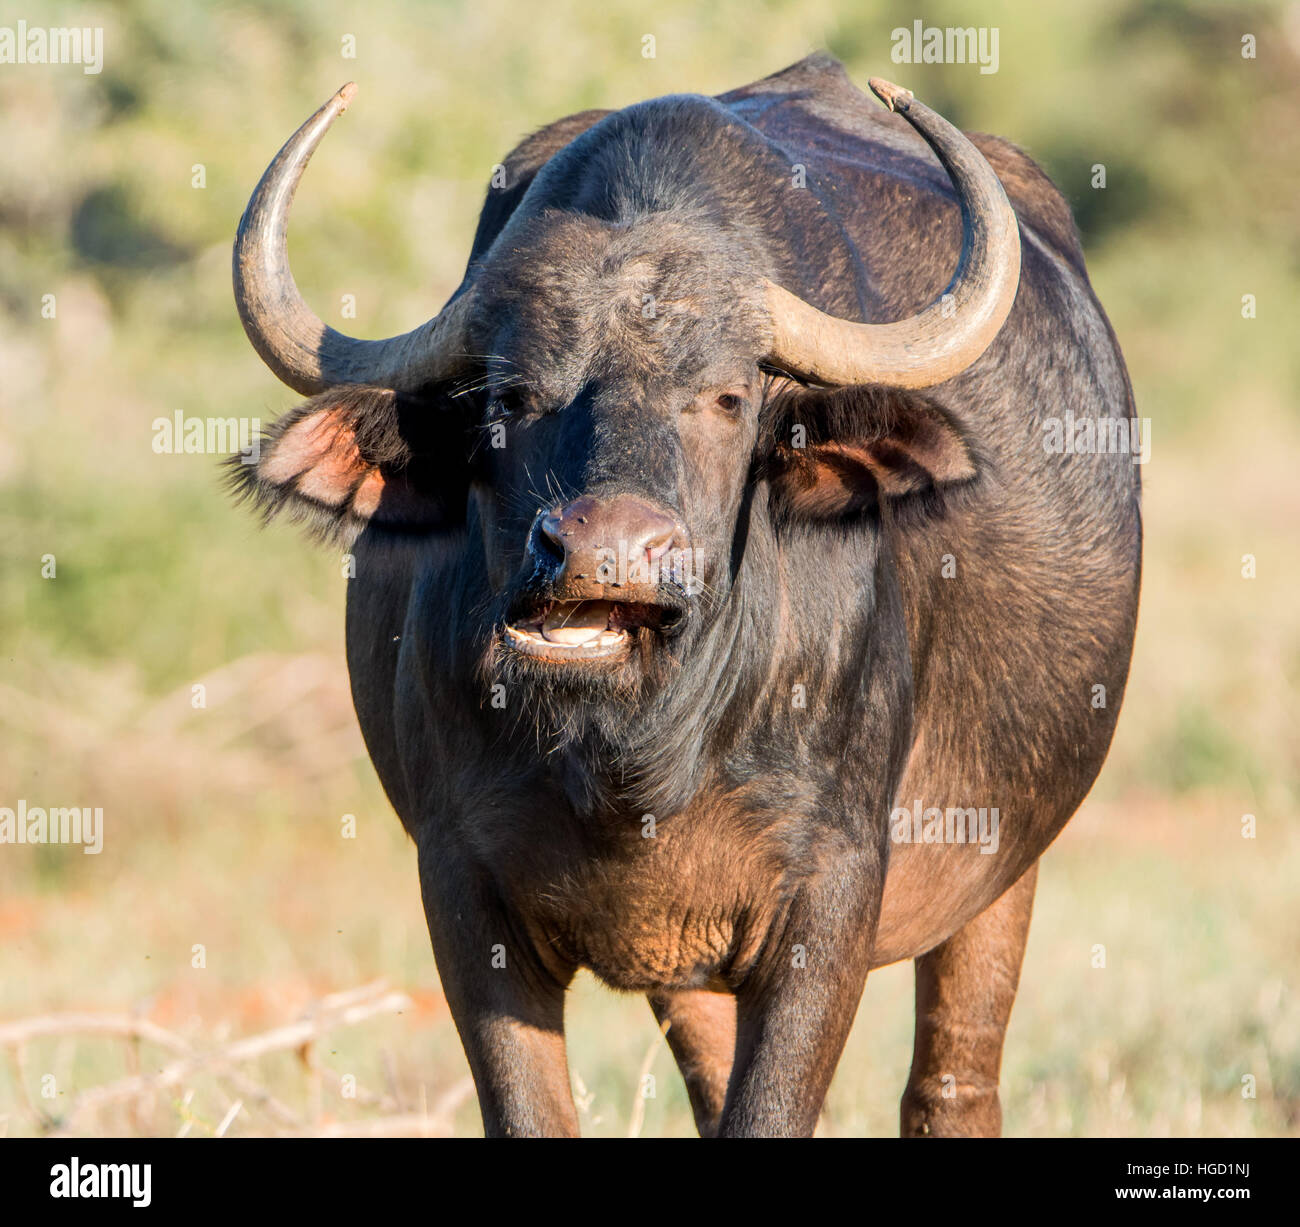 Portrait of African Buffalo in Southern African savanna Stock Photo - Alamy